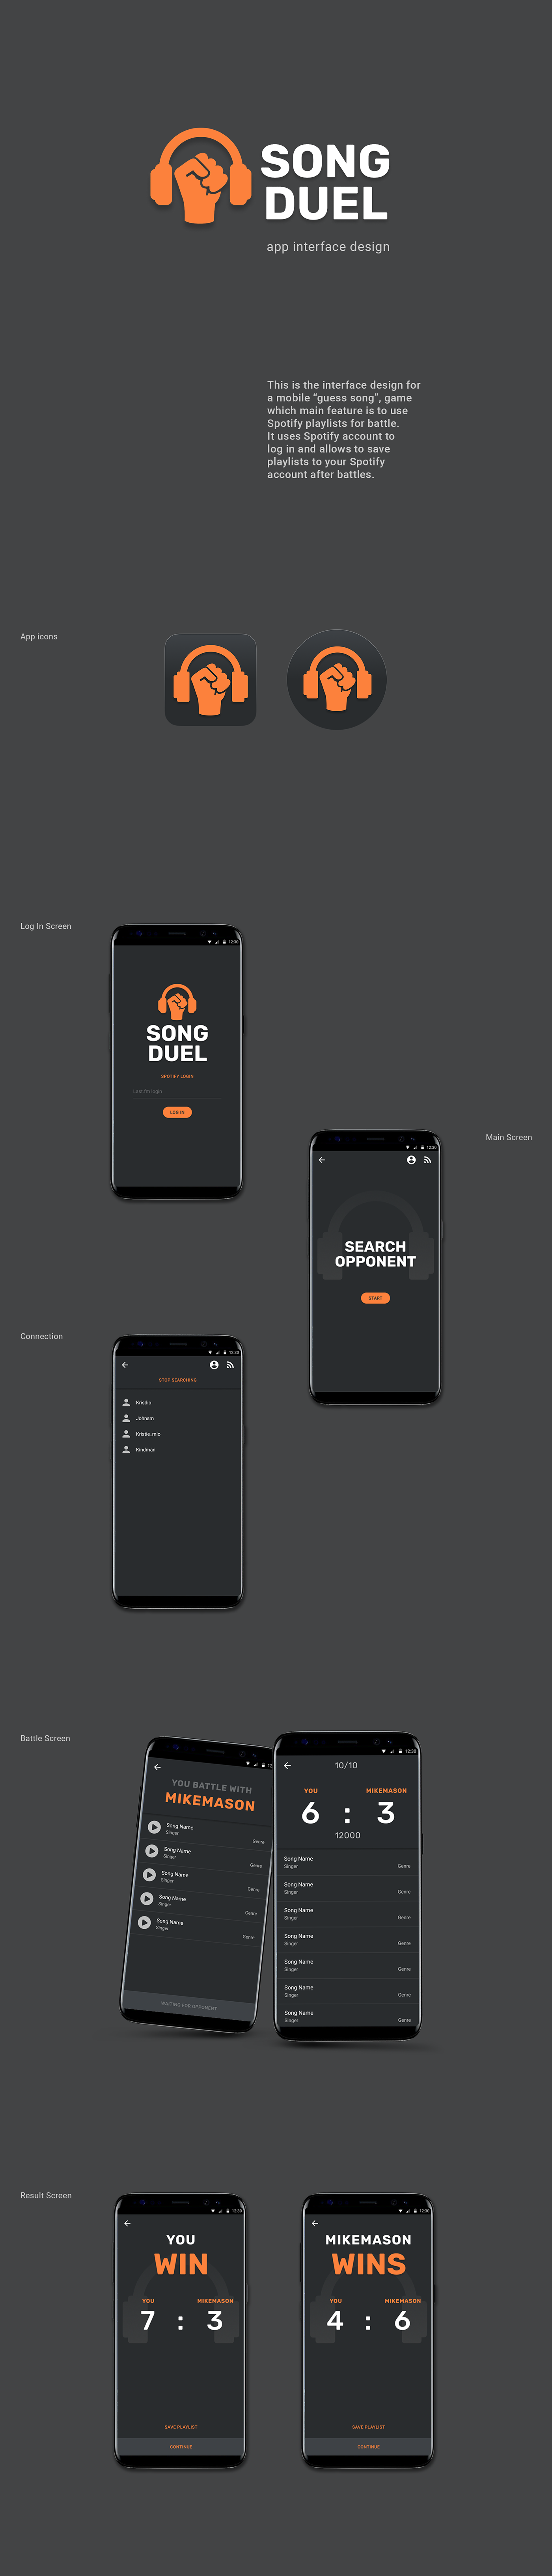 app Interface UI music design Web android apple spotify game